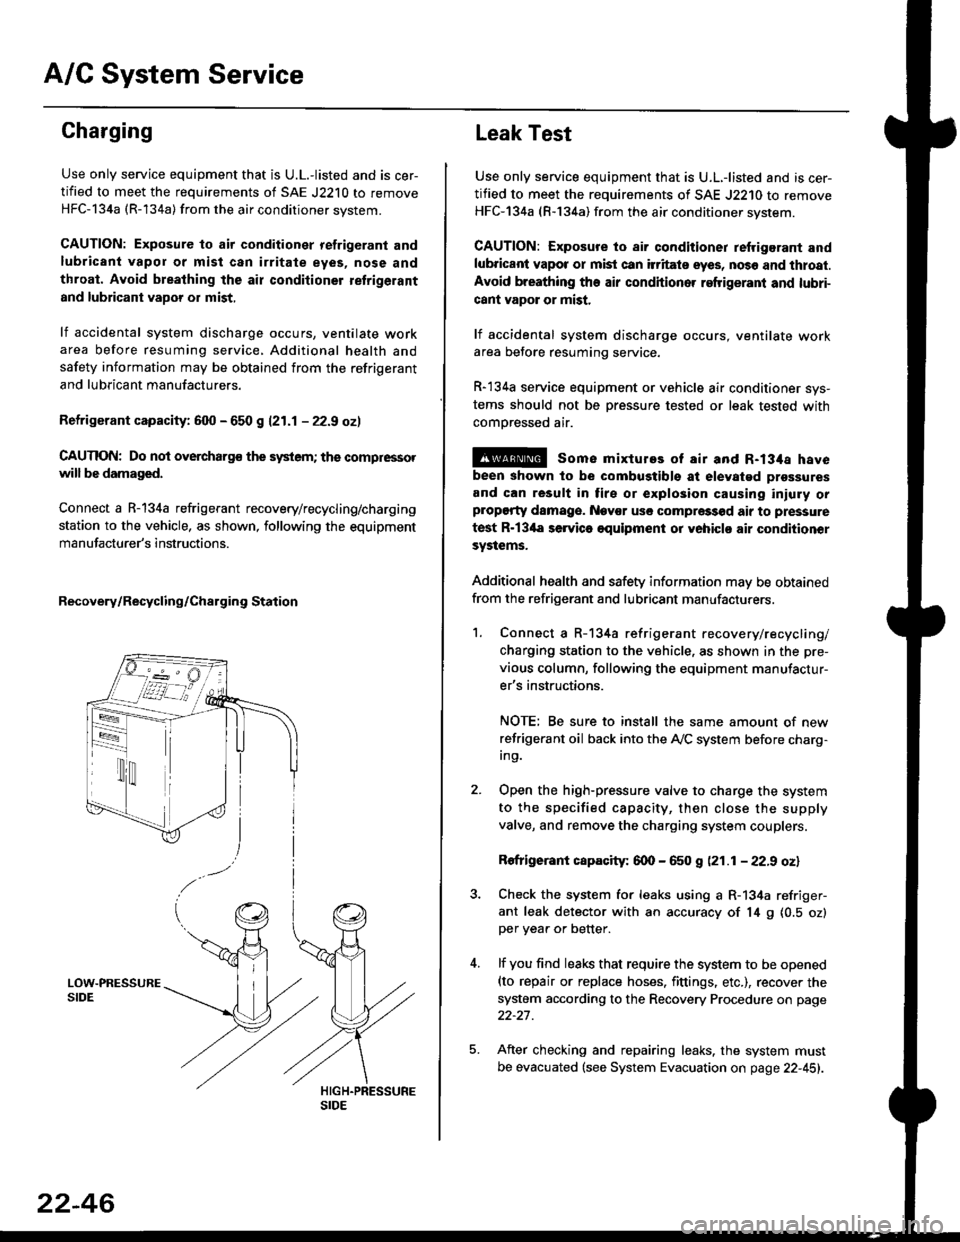 HONDA CIVIC 1998 6.G Service Manual A/C System Service
Charging
Use only service equipment that is U.L.-listed and is cer-
tified to meet the requirements of SAE J2210 to remove
HFC-134a (R-134a) from the air conditioner system.
CAUTION